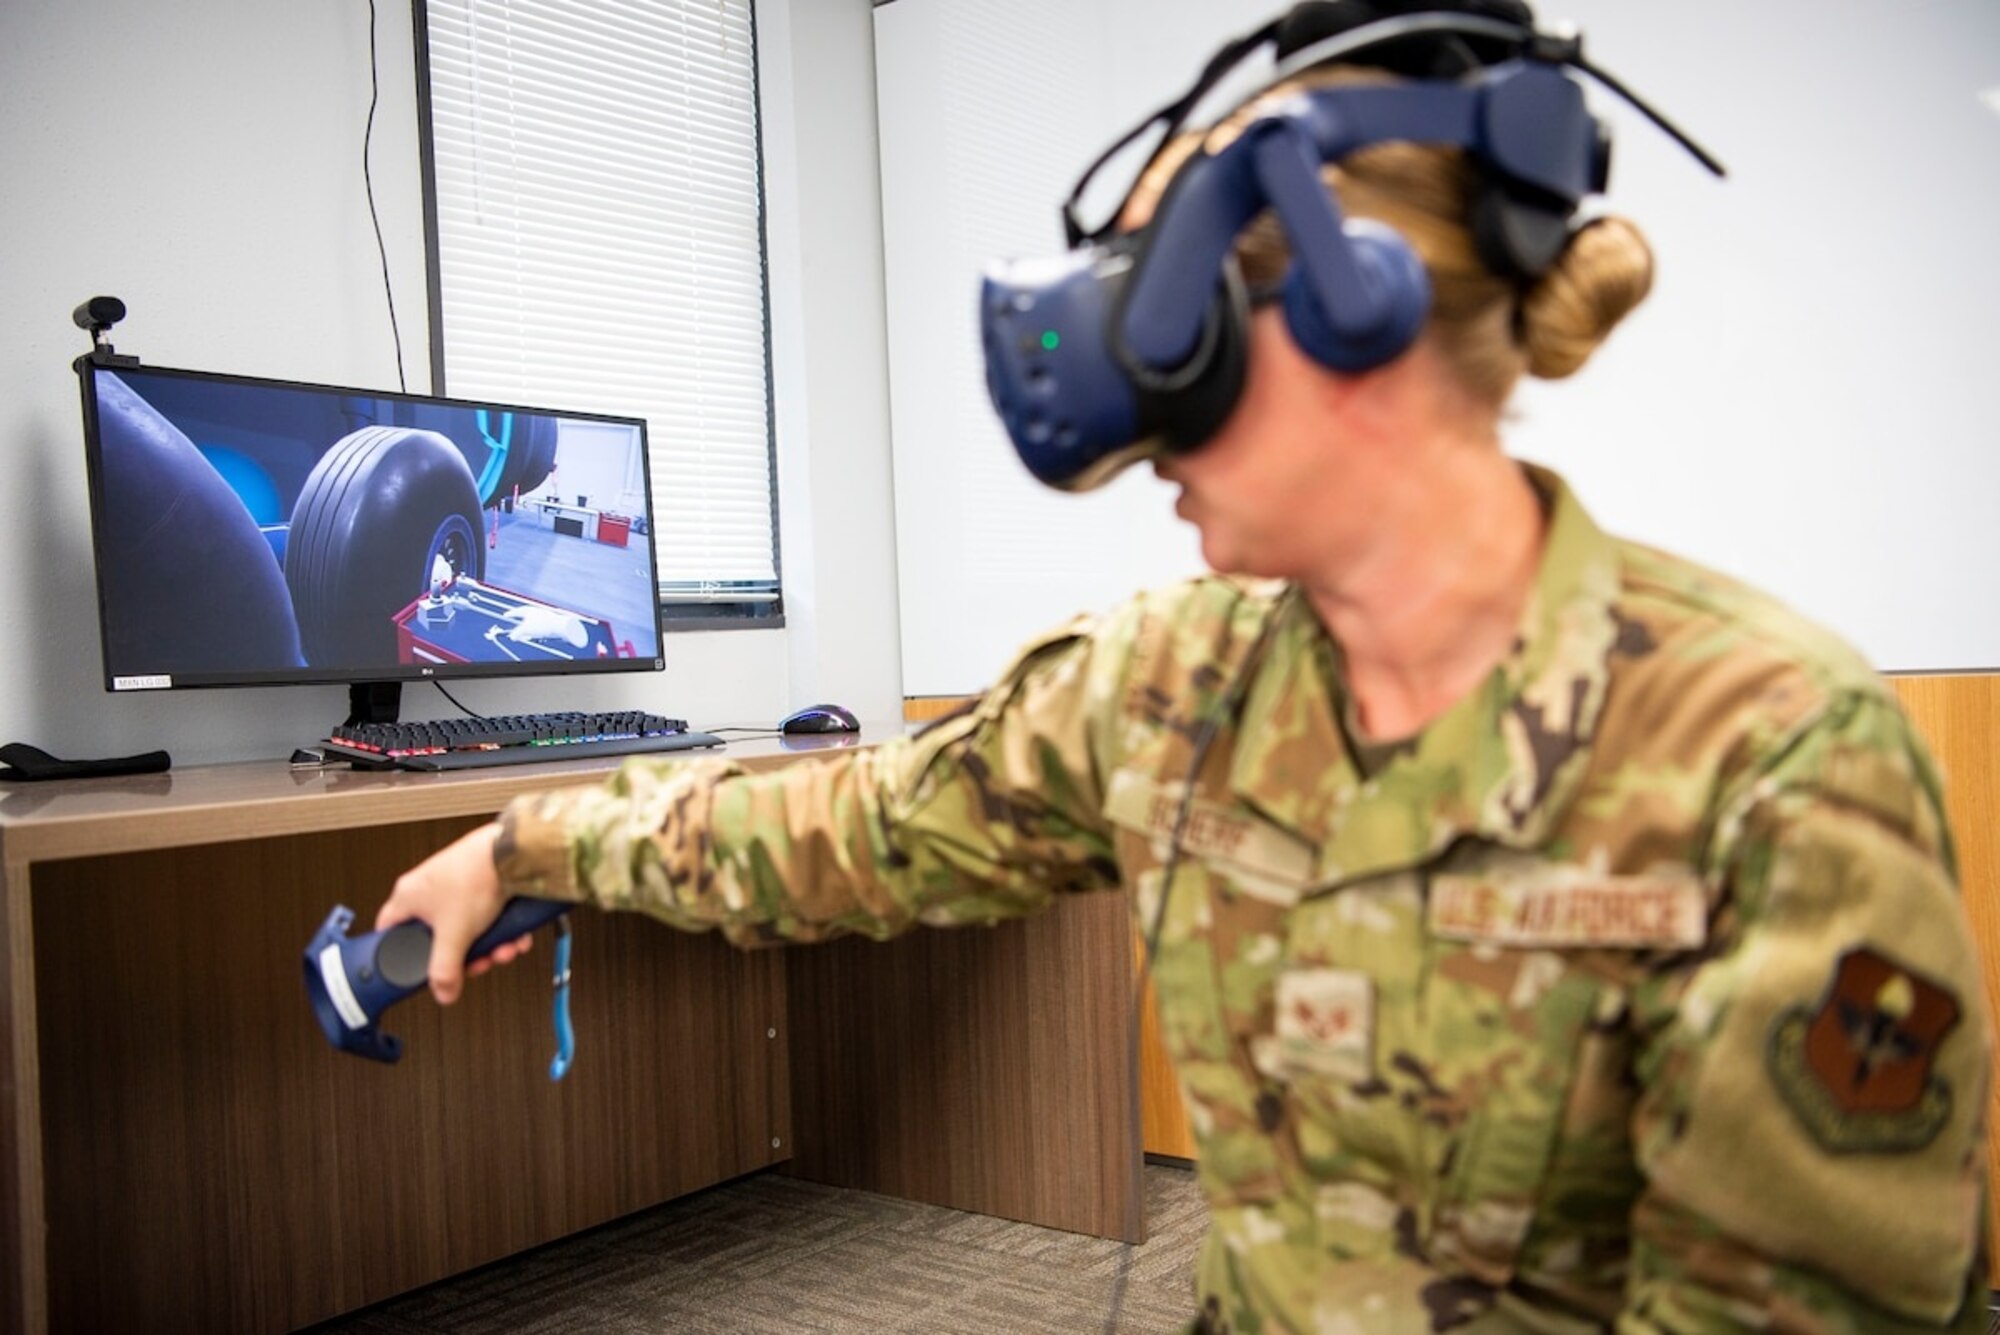 Airman using VR technology for training.